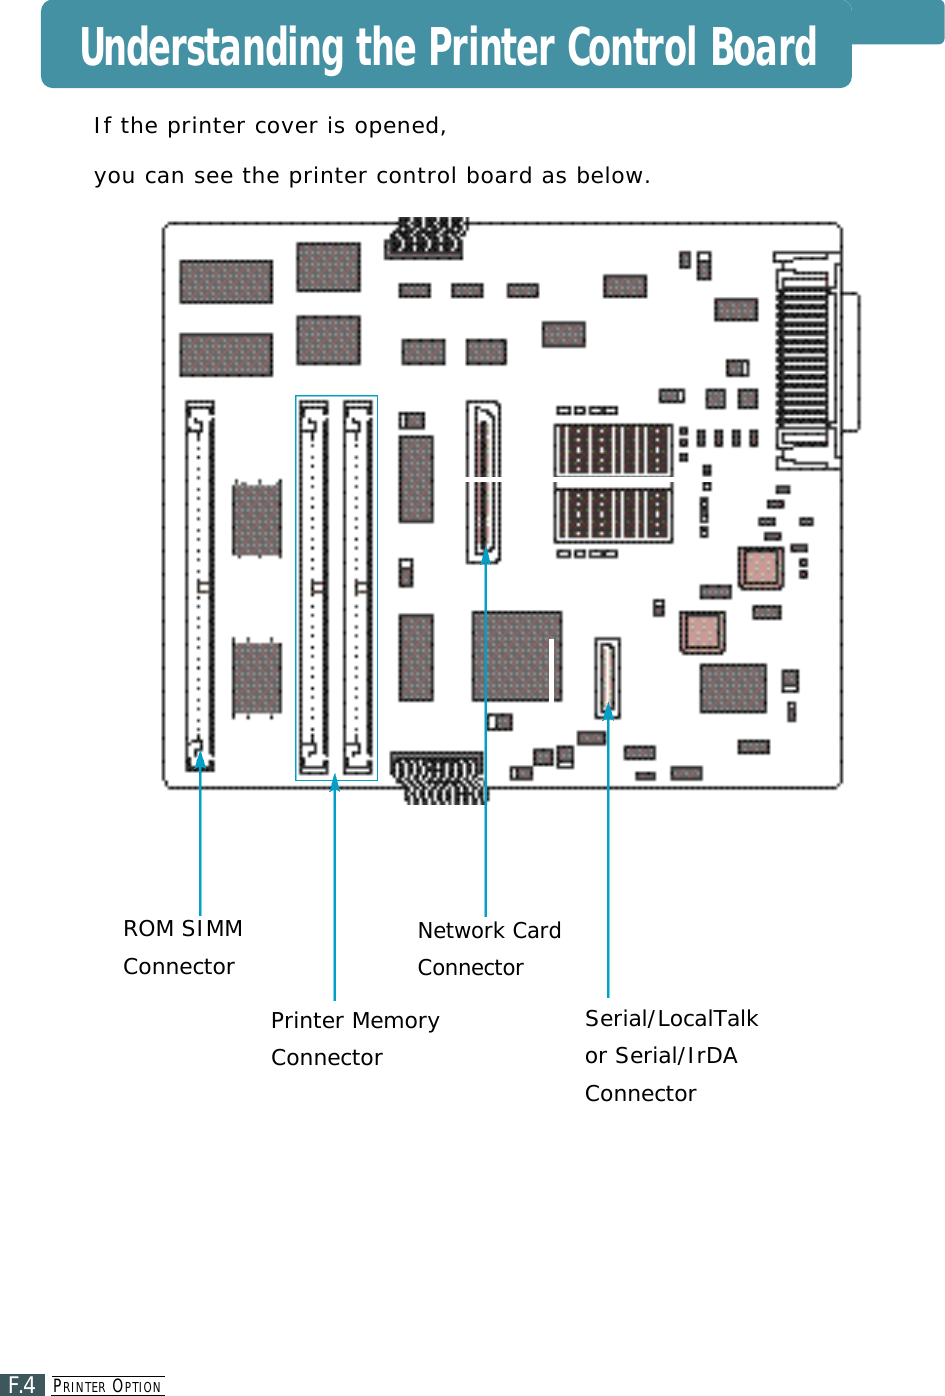 PR I N T E R OP T I O NF.4Network CardC o n n e c t o rSerial/LocalTalk or Serial/IrDAConnectorIf the printer cover is opened, you can see the printer control board as below.Printer MemoryConnectorROM SIMMConnectorUnderstanding the Printer Control Board